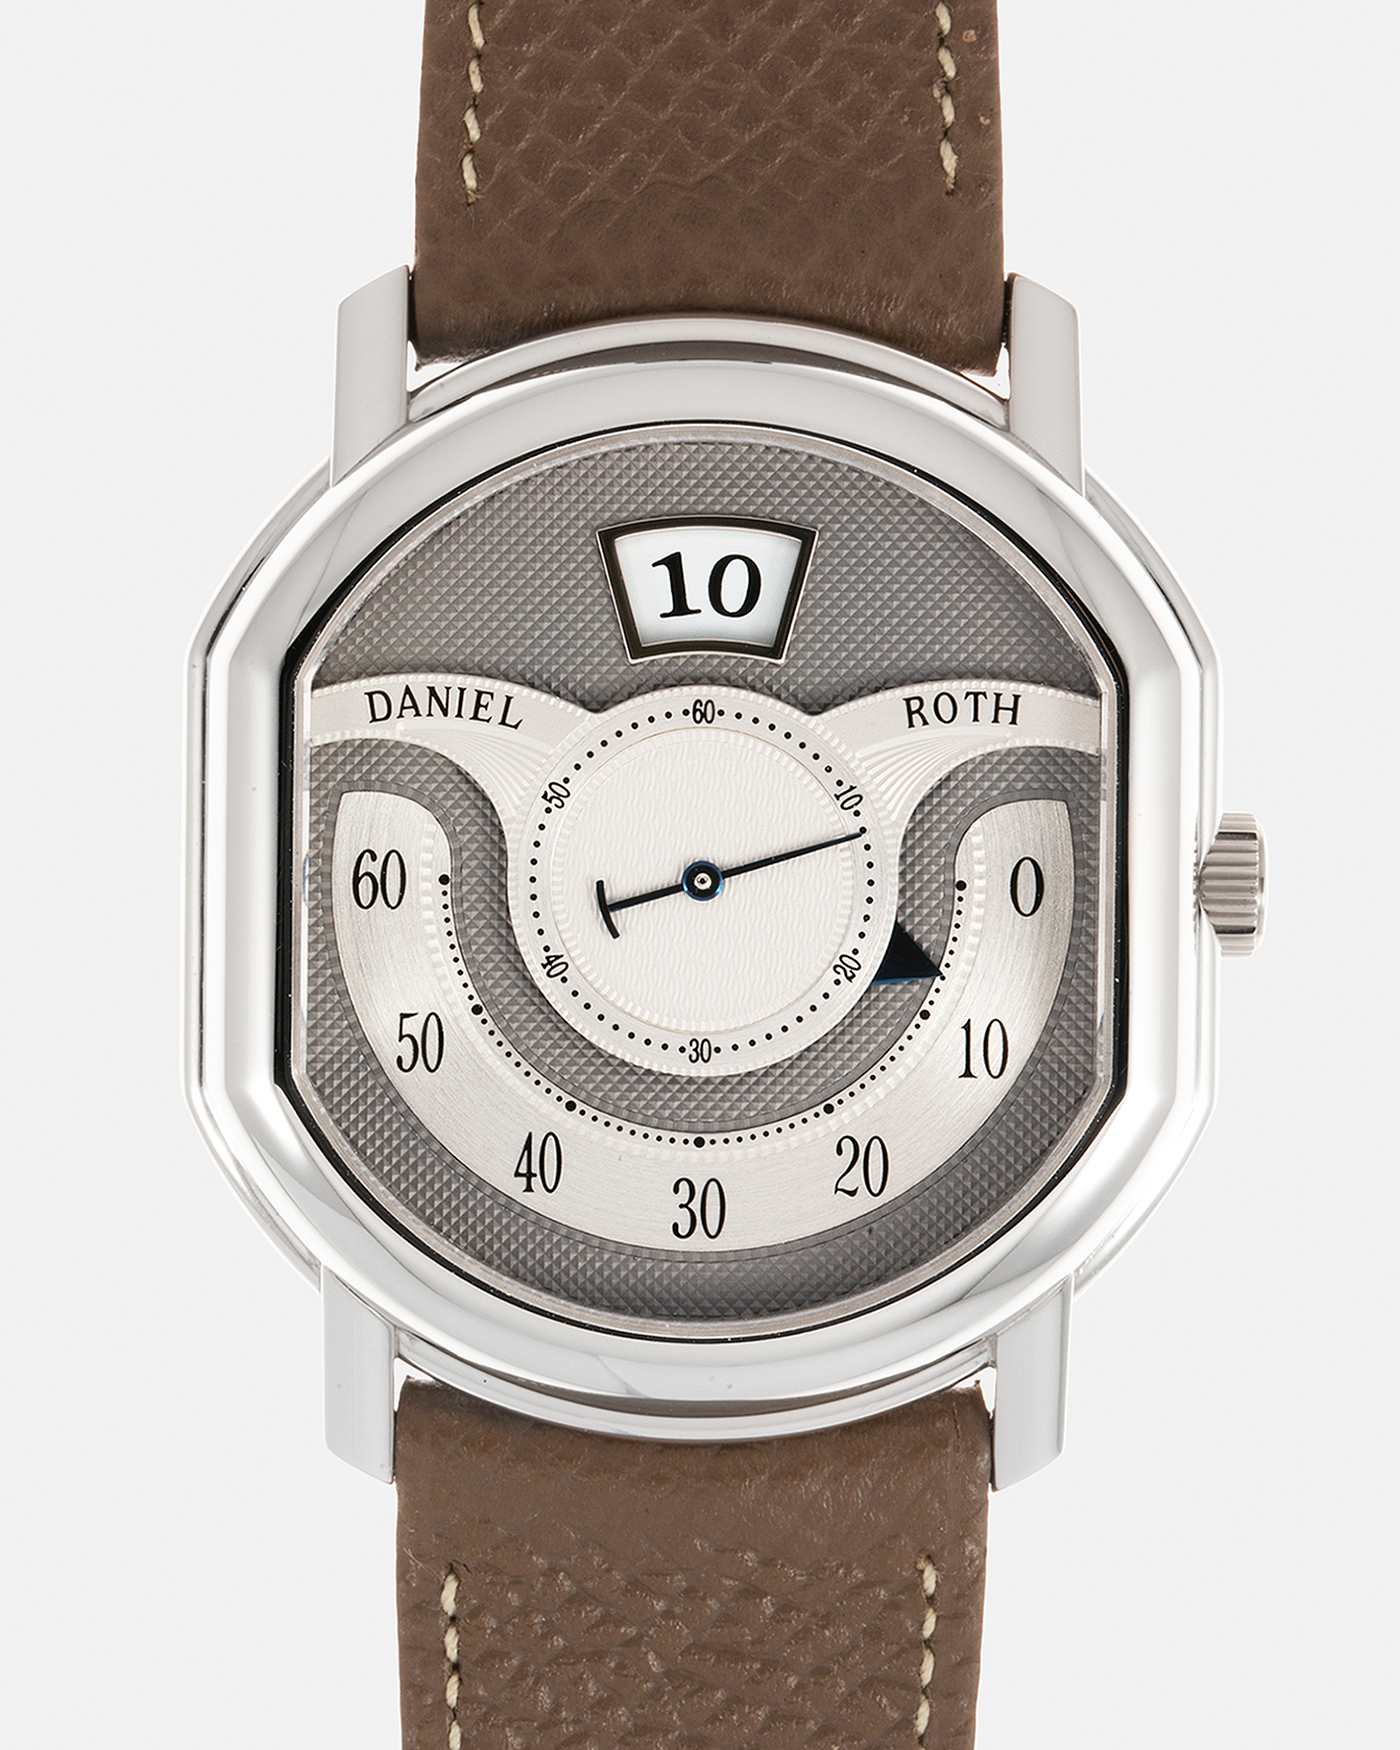 Brand: Daniel Roth Year: 1999 Model: 10th Anniversary Papillon, Limited Edition of 30 pieces in Platinum Material: Platinum Movement: Daniel Roth Cal. DR113, Self-Winding Case Dimensions: 35mm x 41mm x 11mm Strap: Nostime Taupe Textured Calf Strap with Platinum Tang Buckle, additional Daniel Roth Black Alligator Strap